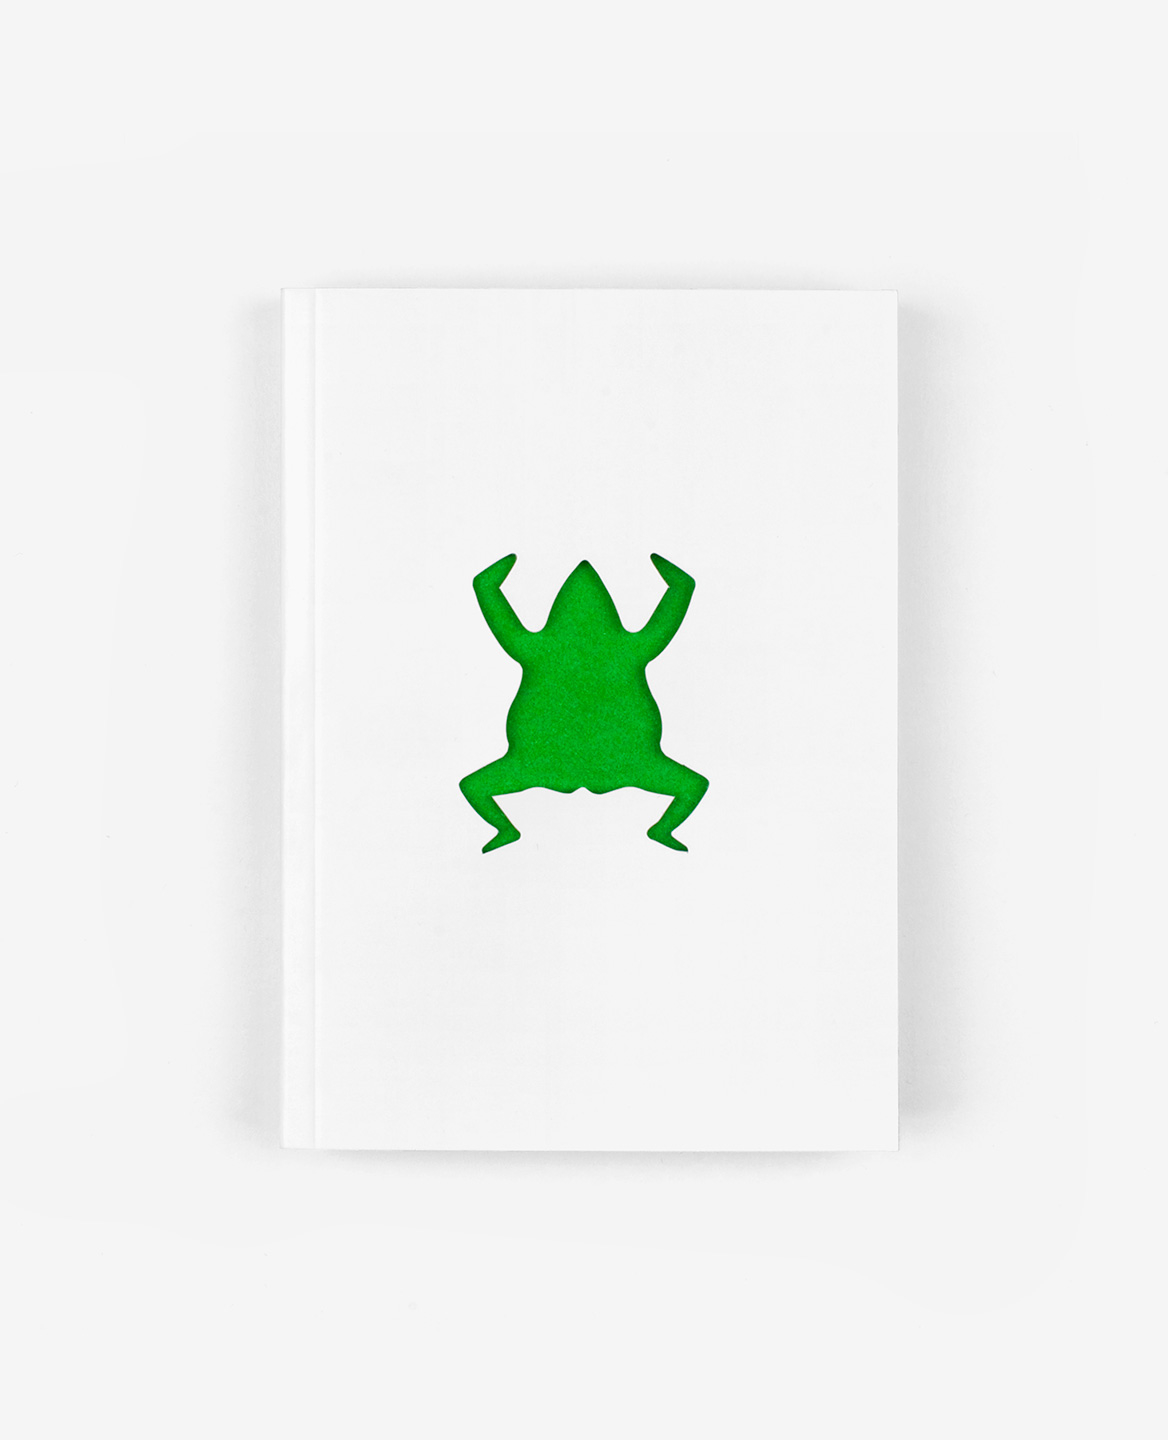 Green Frog on the cover of the book Zoo in my hand by Inkyeong & Sunkyung Kim published by Éditions du livre